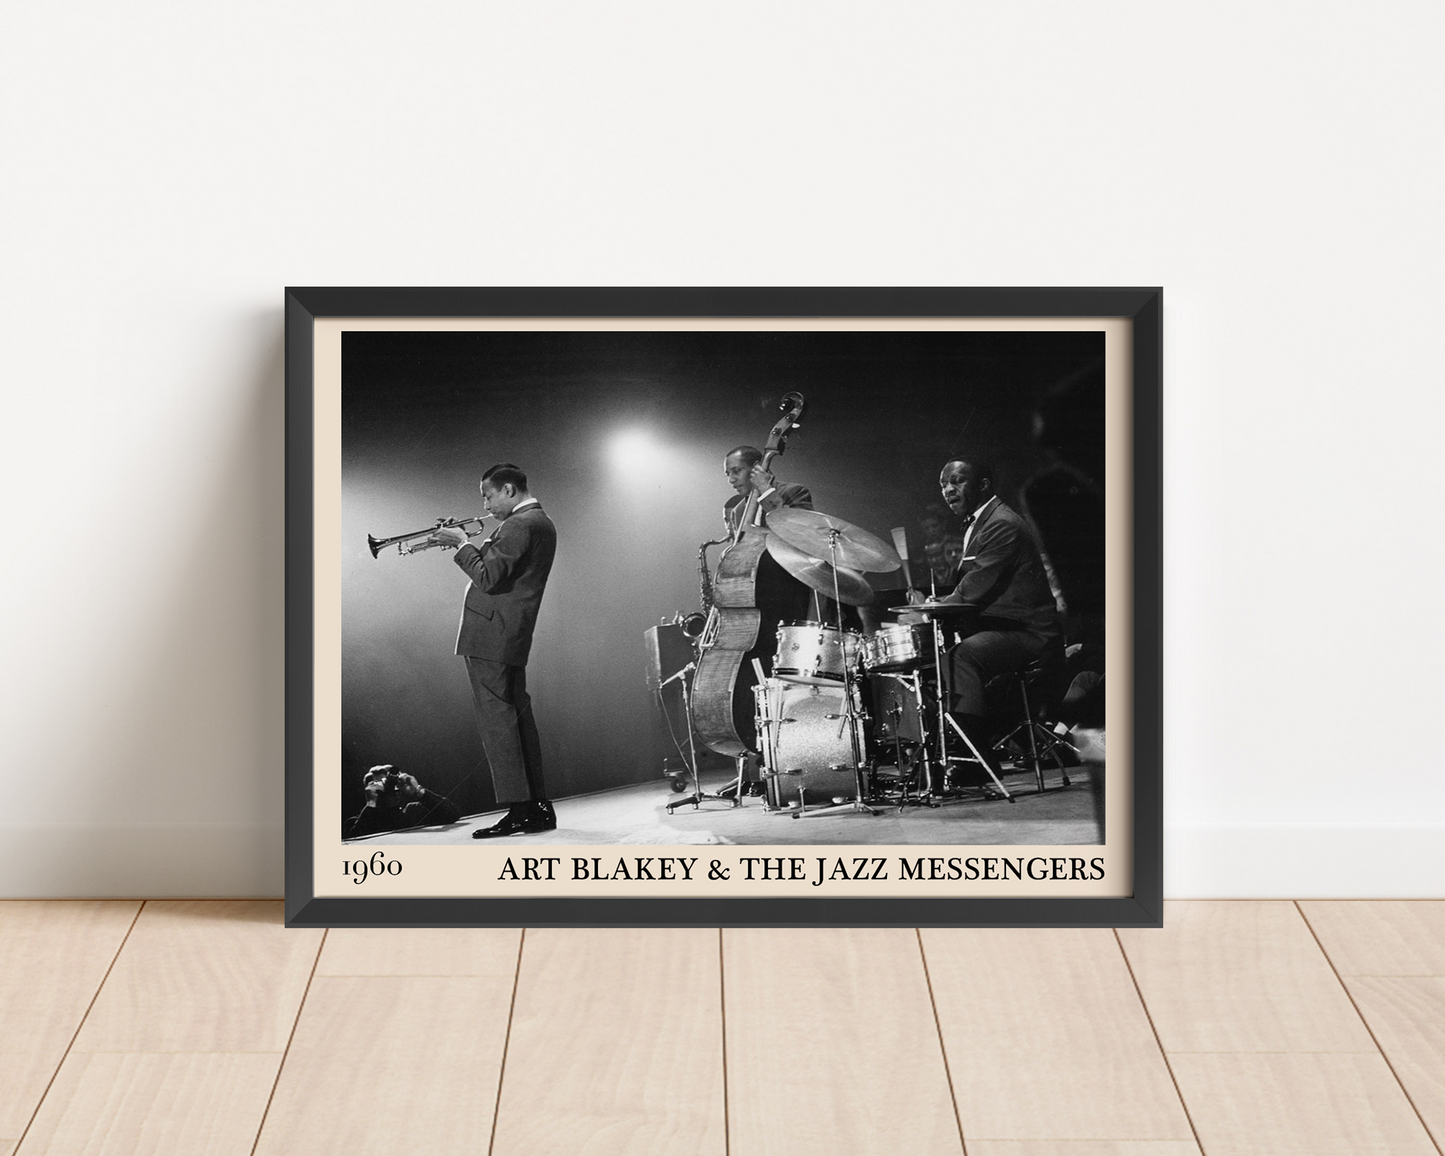 Black framed poster of Art Blakey & The Jazz Messengers against a white wall.